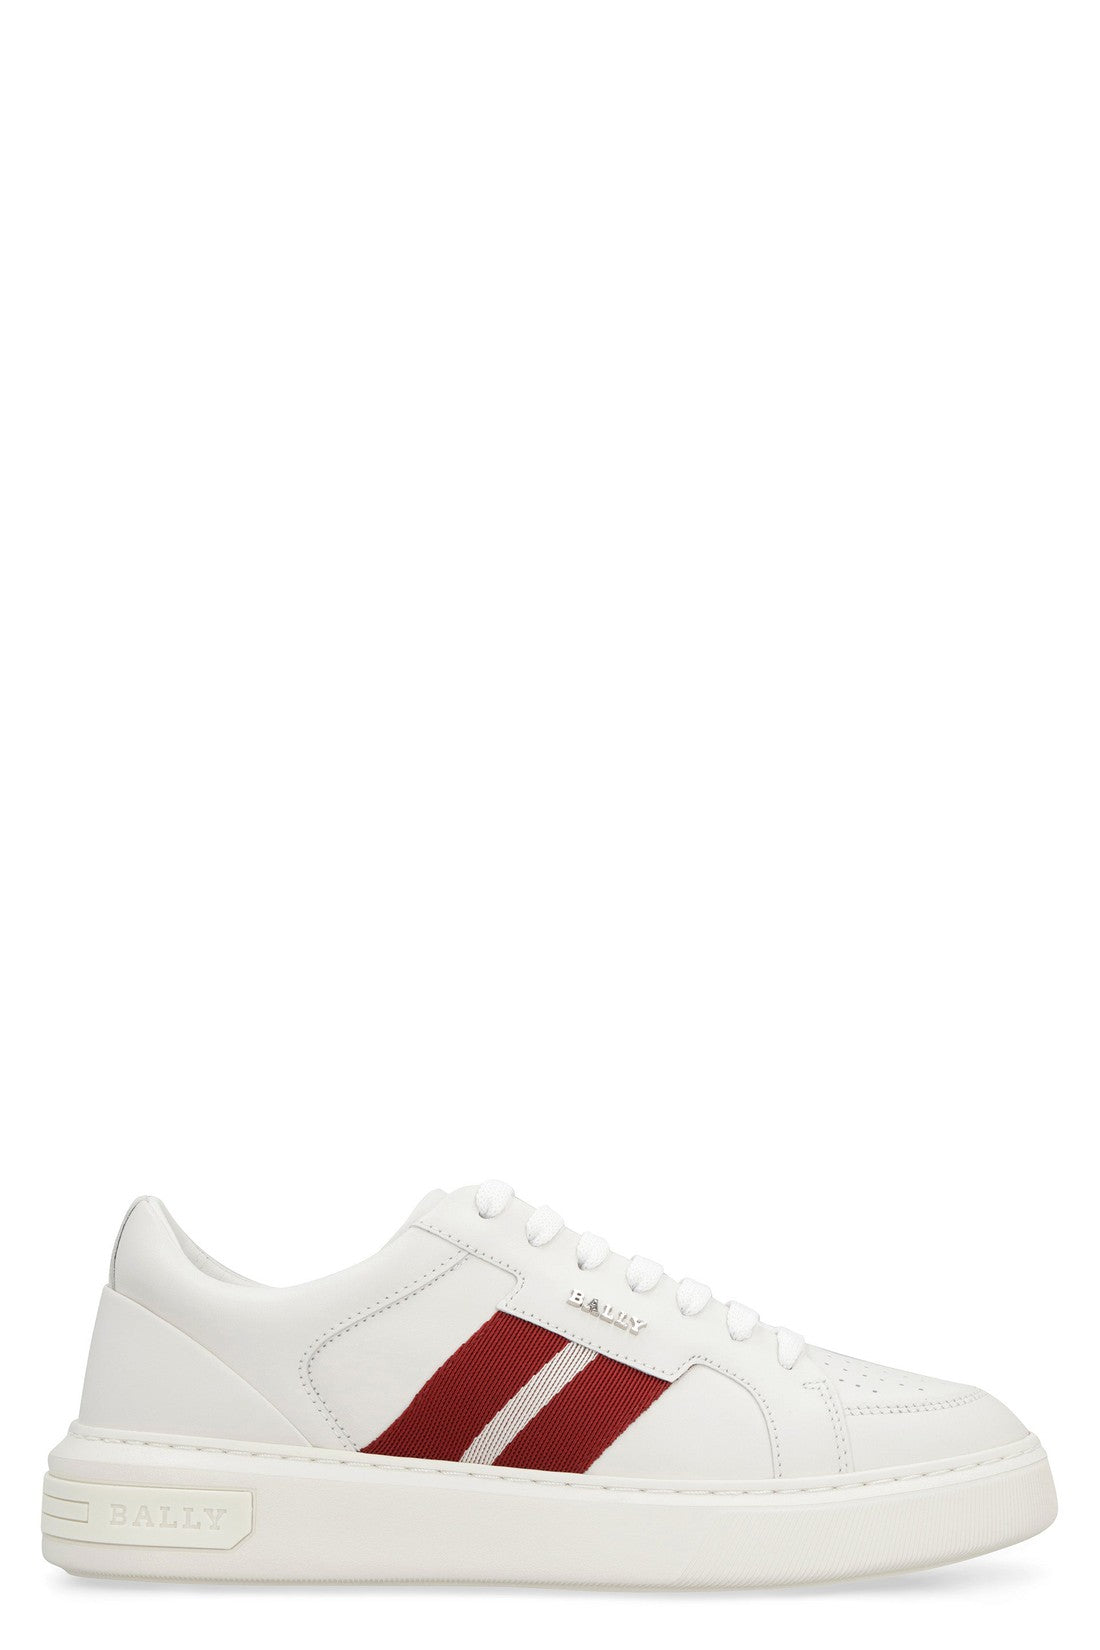 Bally-OUTLET-SALE-Moony leather sneakers-ARCHIVIST